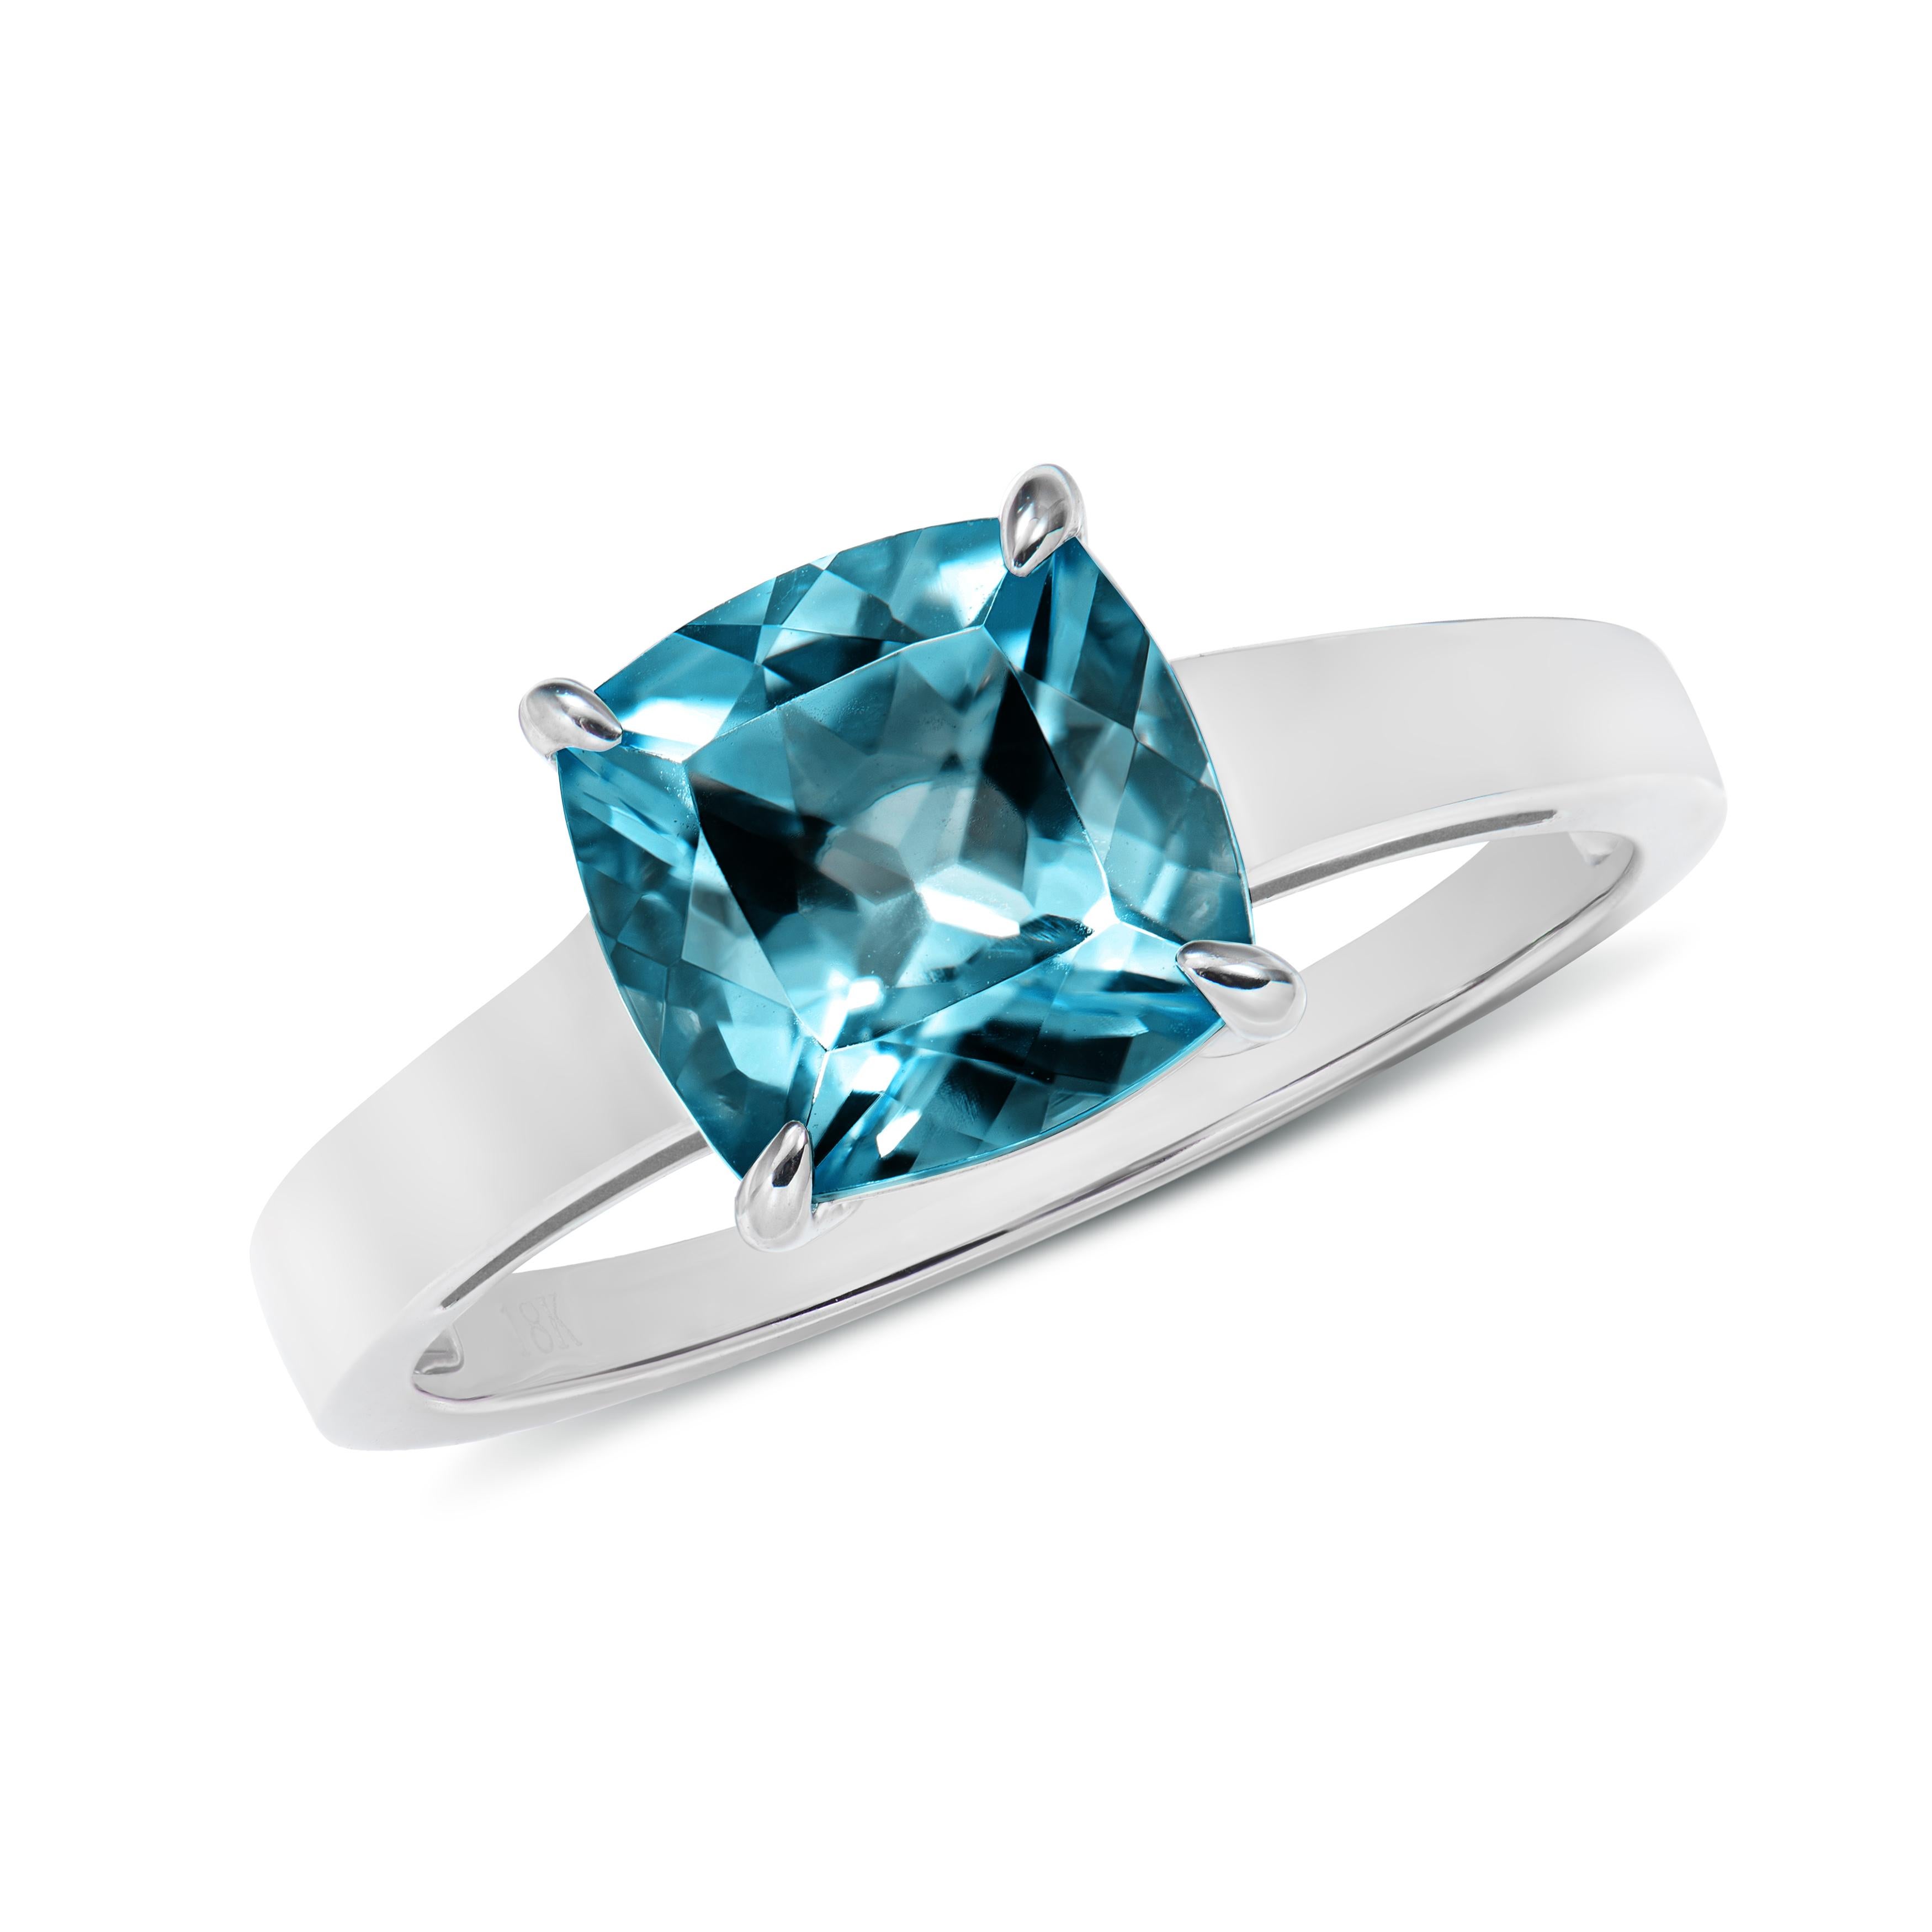 Presented A lovely collection of gems, including London Blue Topaz, Rhodolite, Peridot, Amethyst, Sky Blue Topaz, and Swiss Blue Topaz is perfect for people who value quality and want to wear it to any occasion or celebration. The white gold London